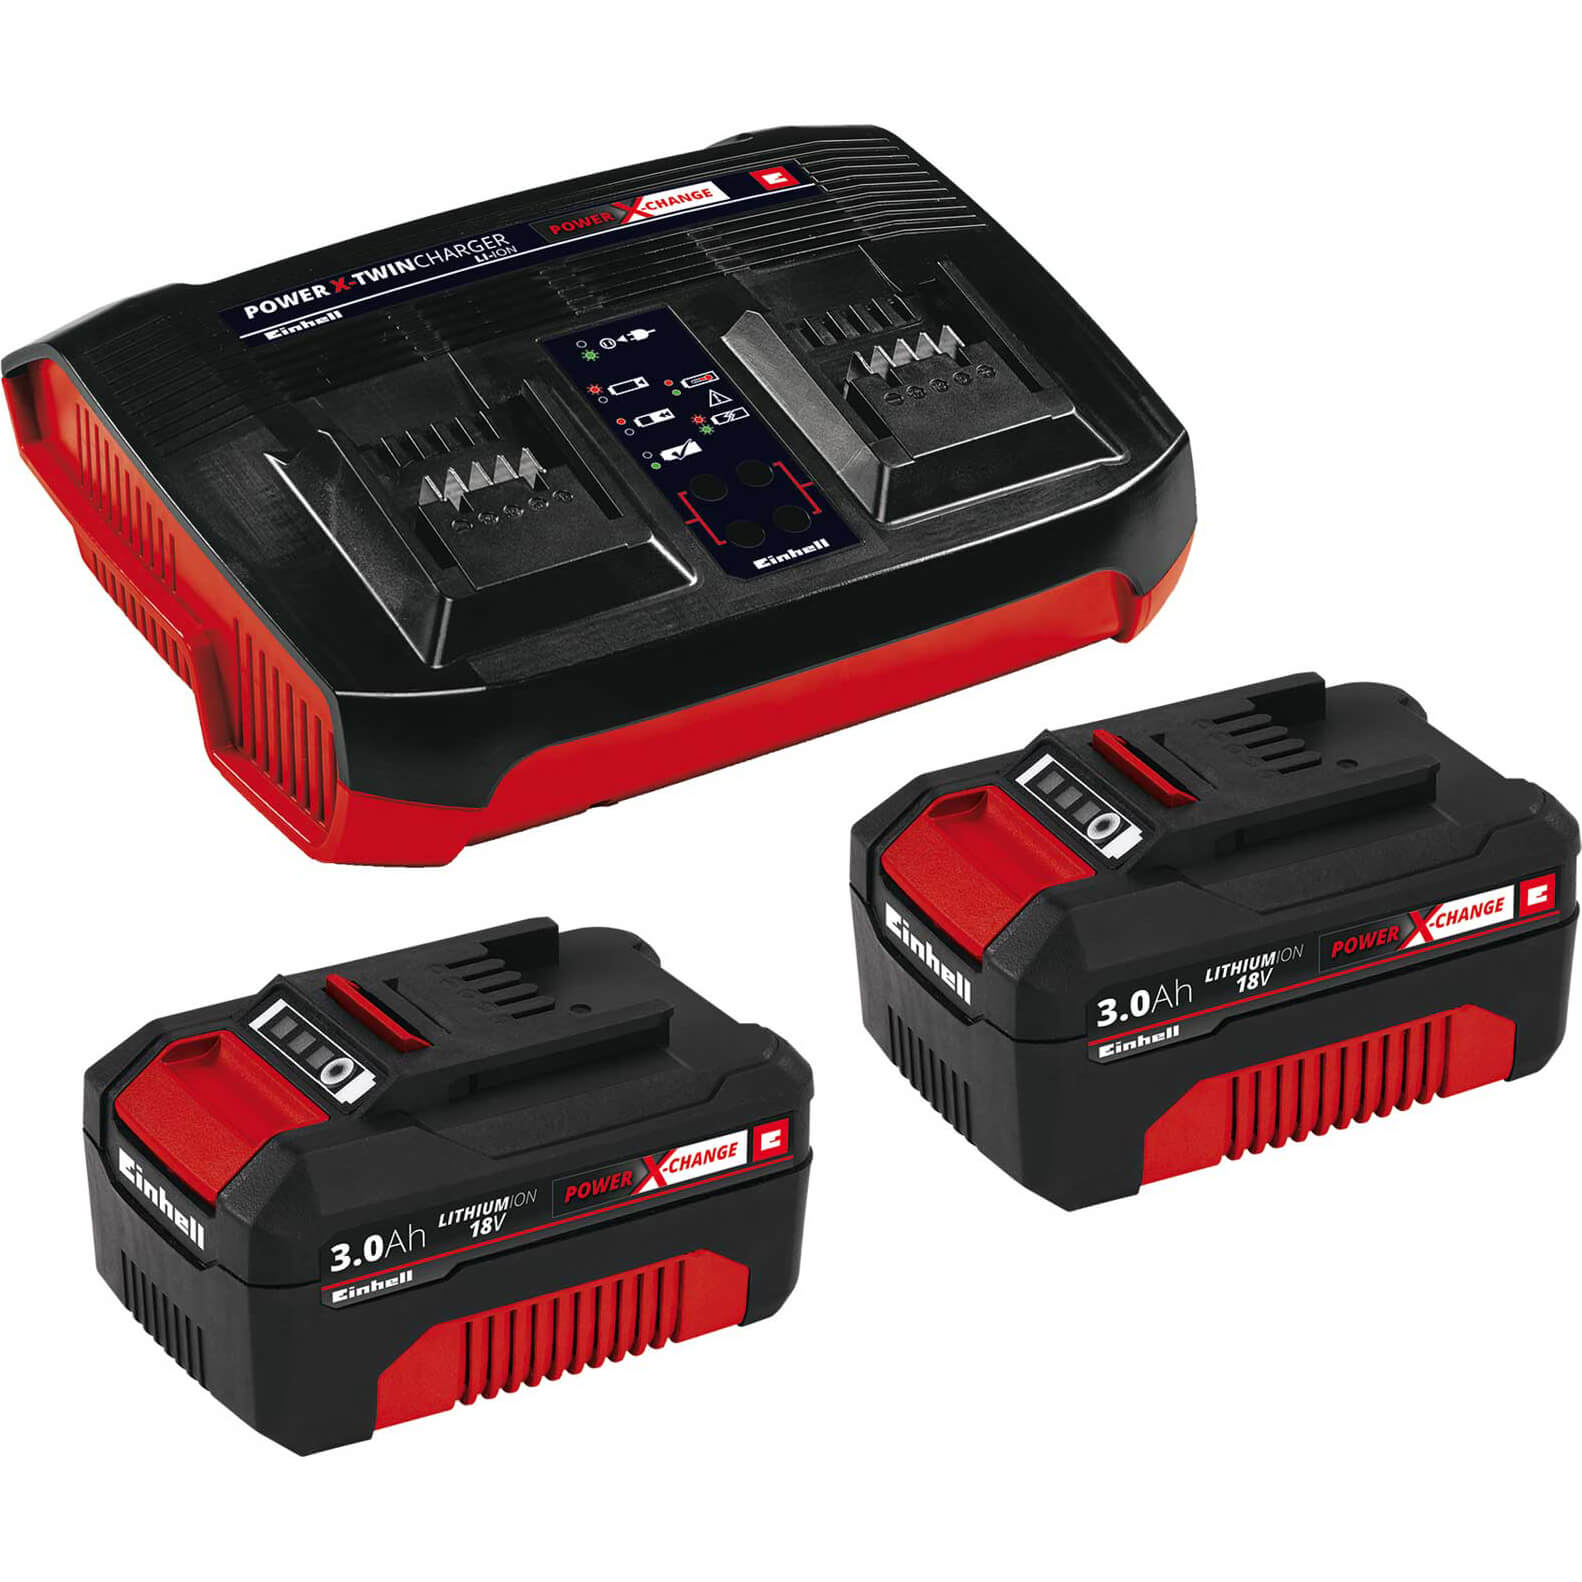 Photo of Einhell Genuine Power X-change Twin Cordless Battery Charger And Batteries 3ah 3ah